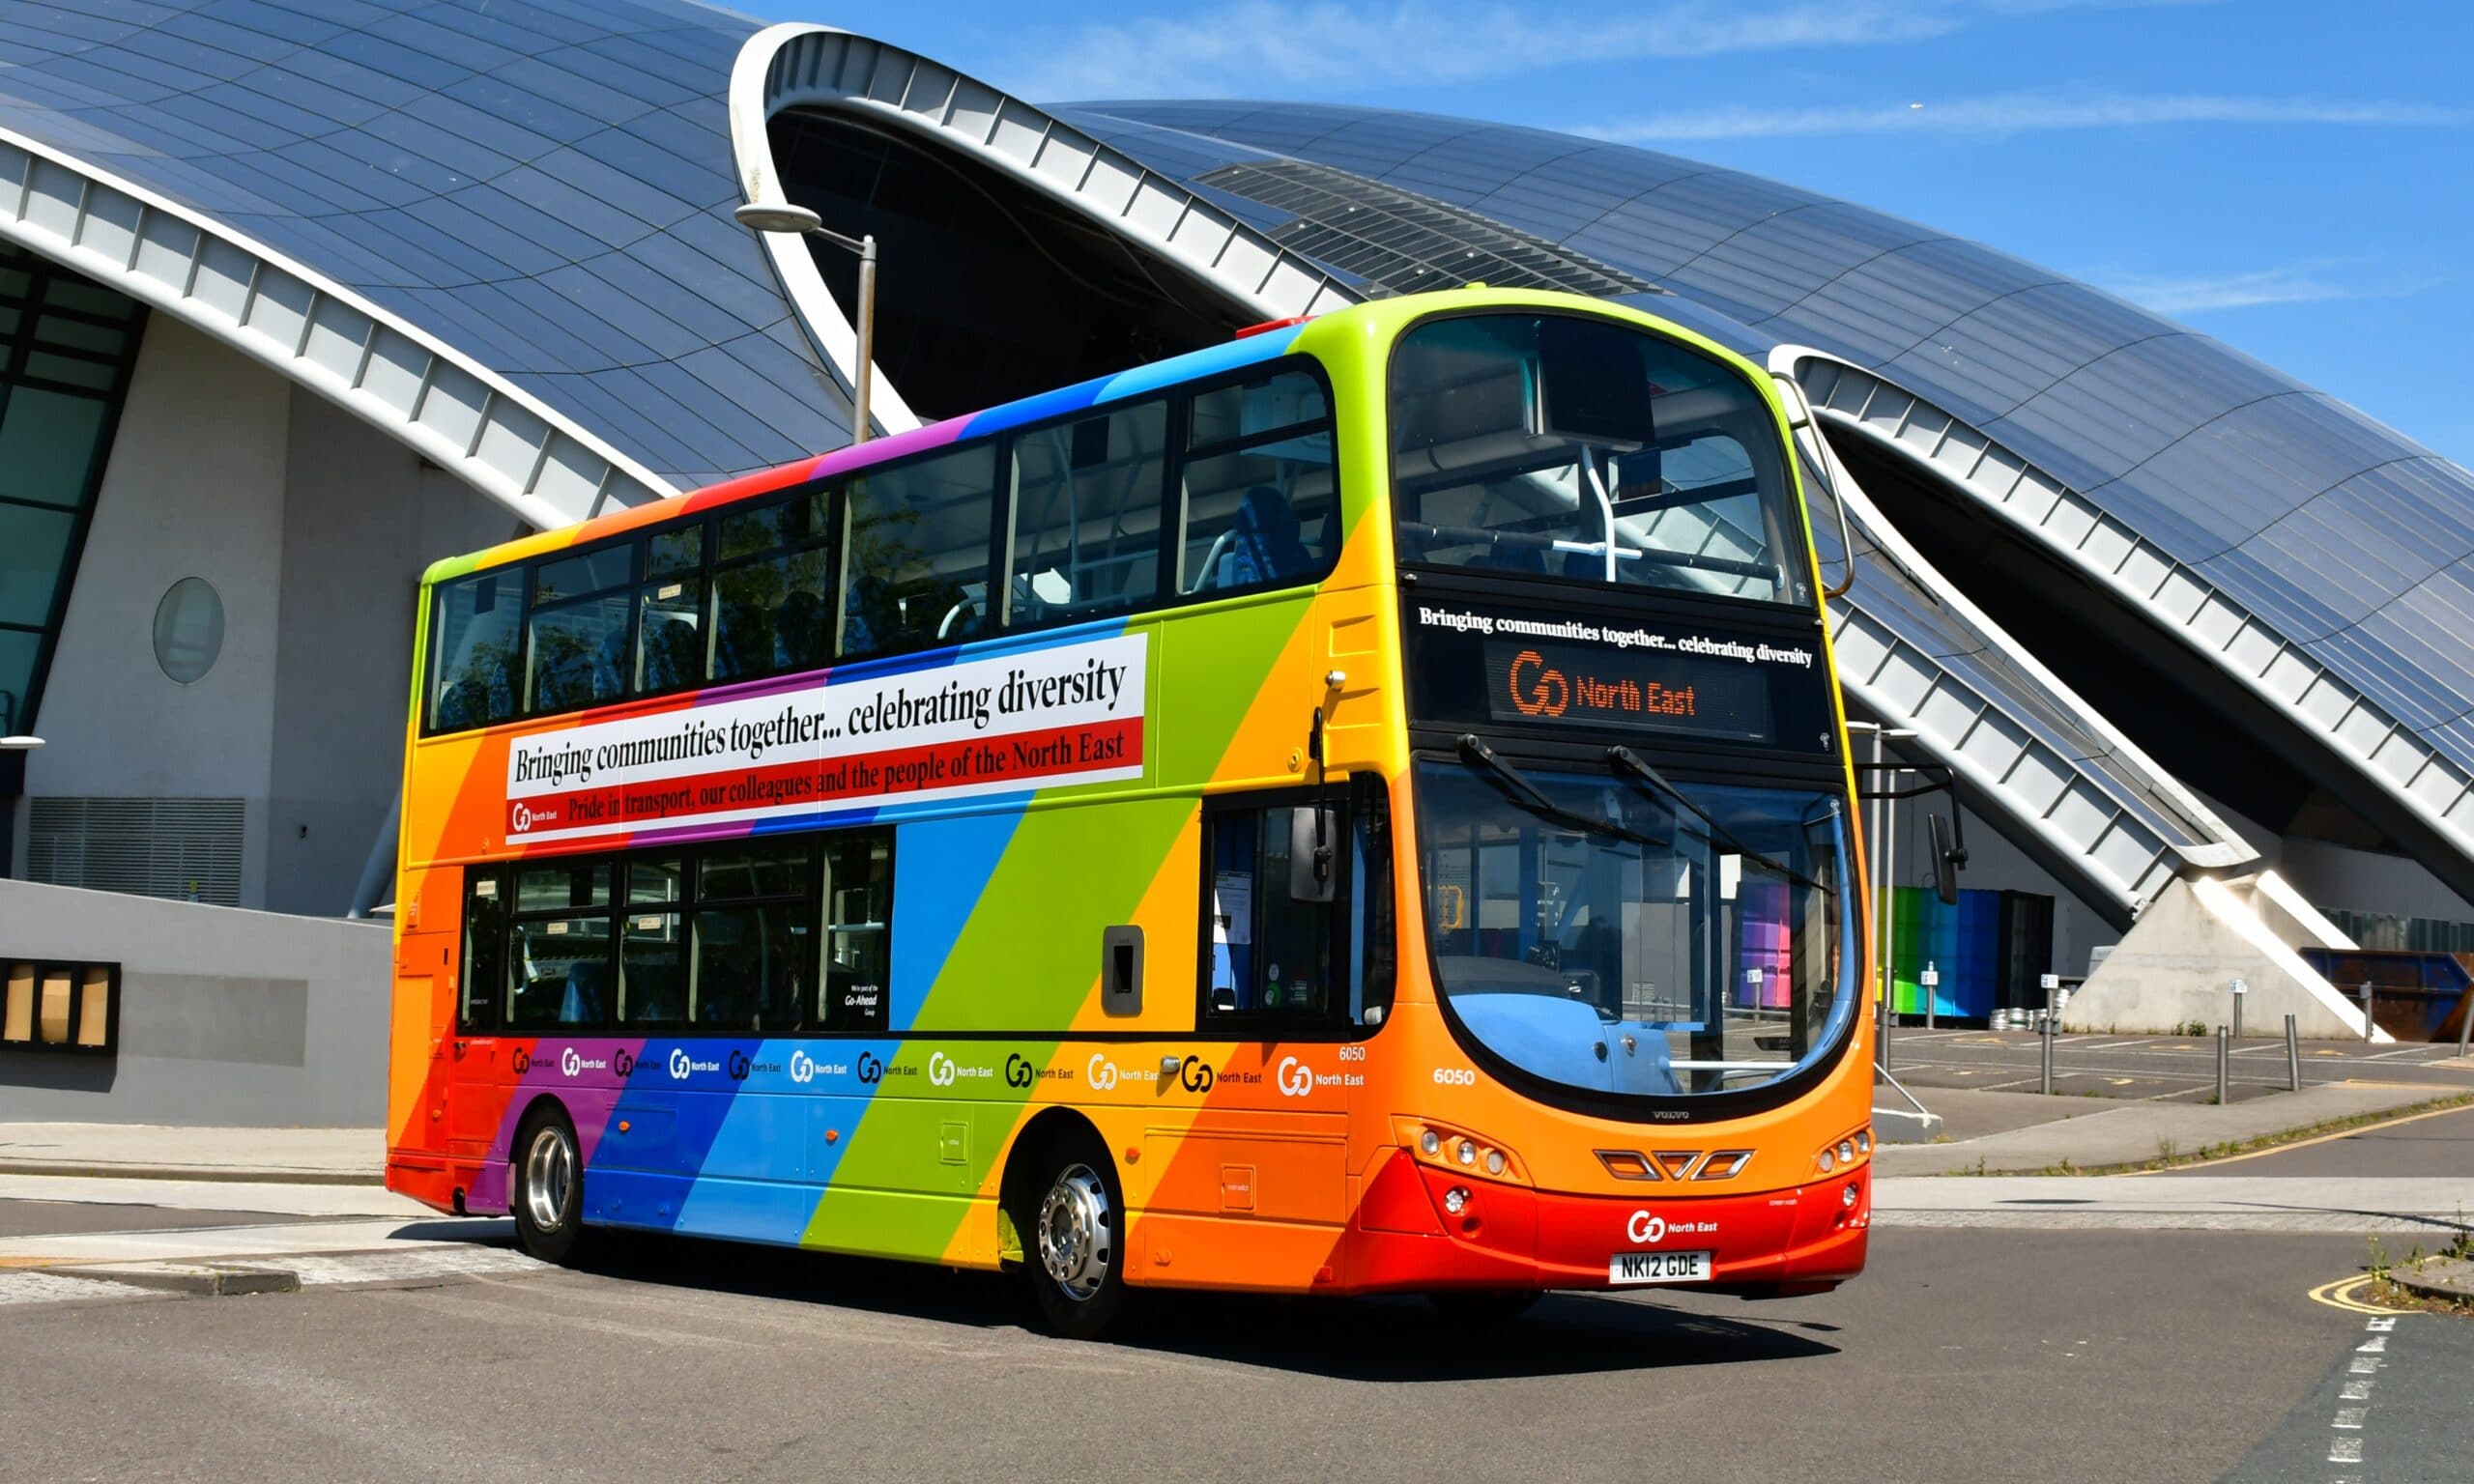 Go North East bus pained in rainbow colours under a large silver building